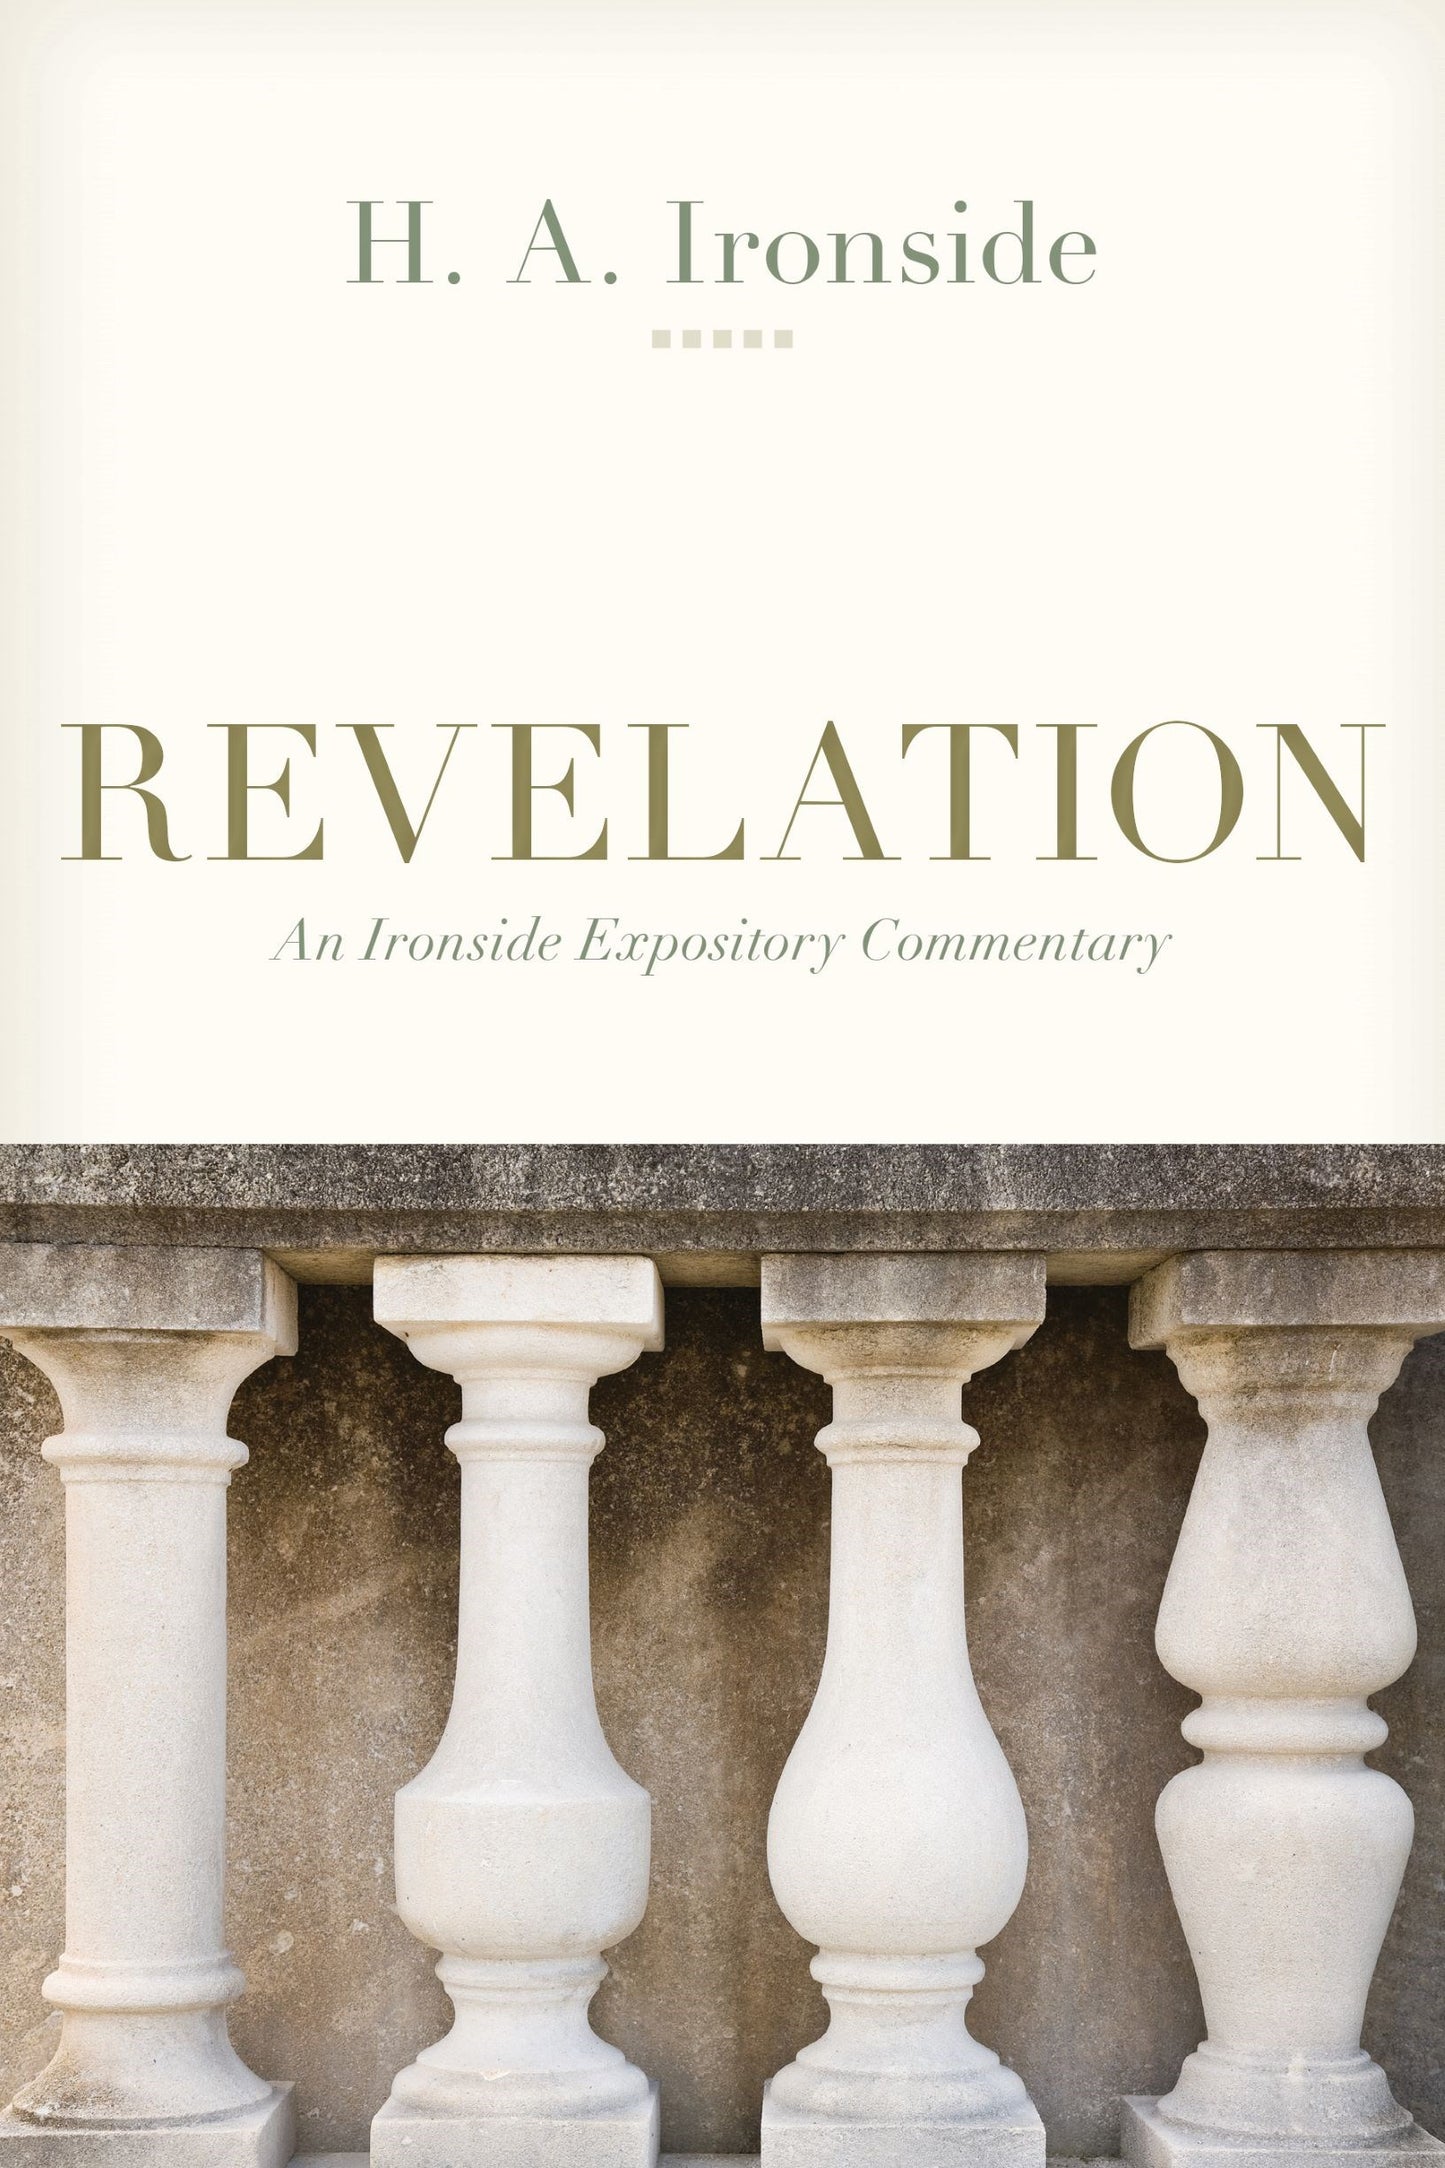 Revelation (An Ironside Expository Commentary)